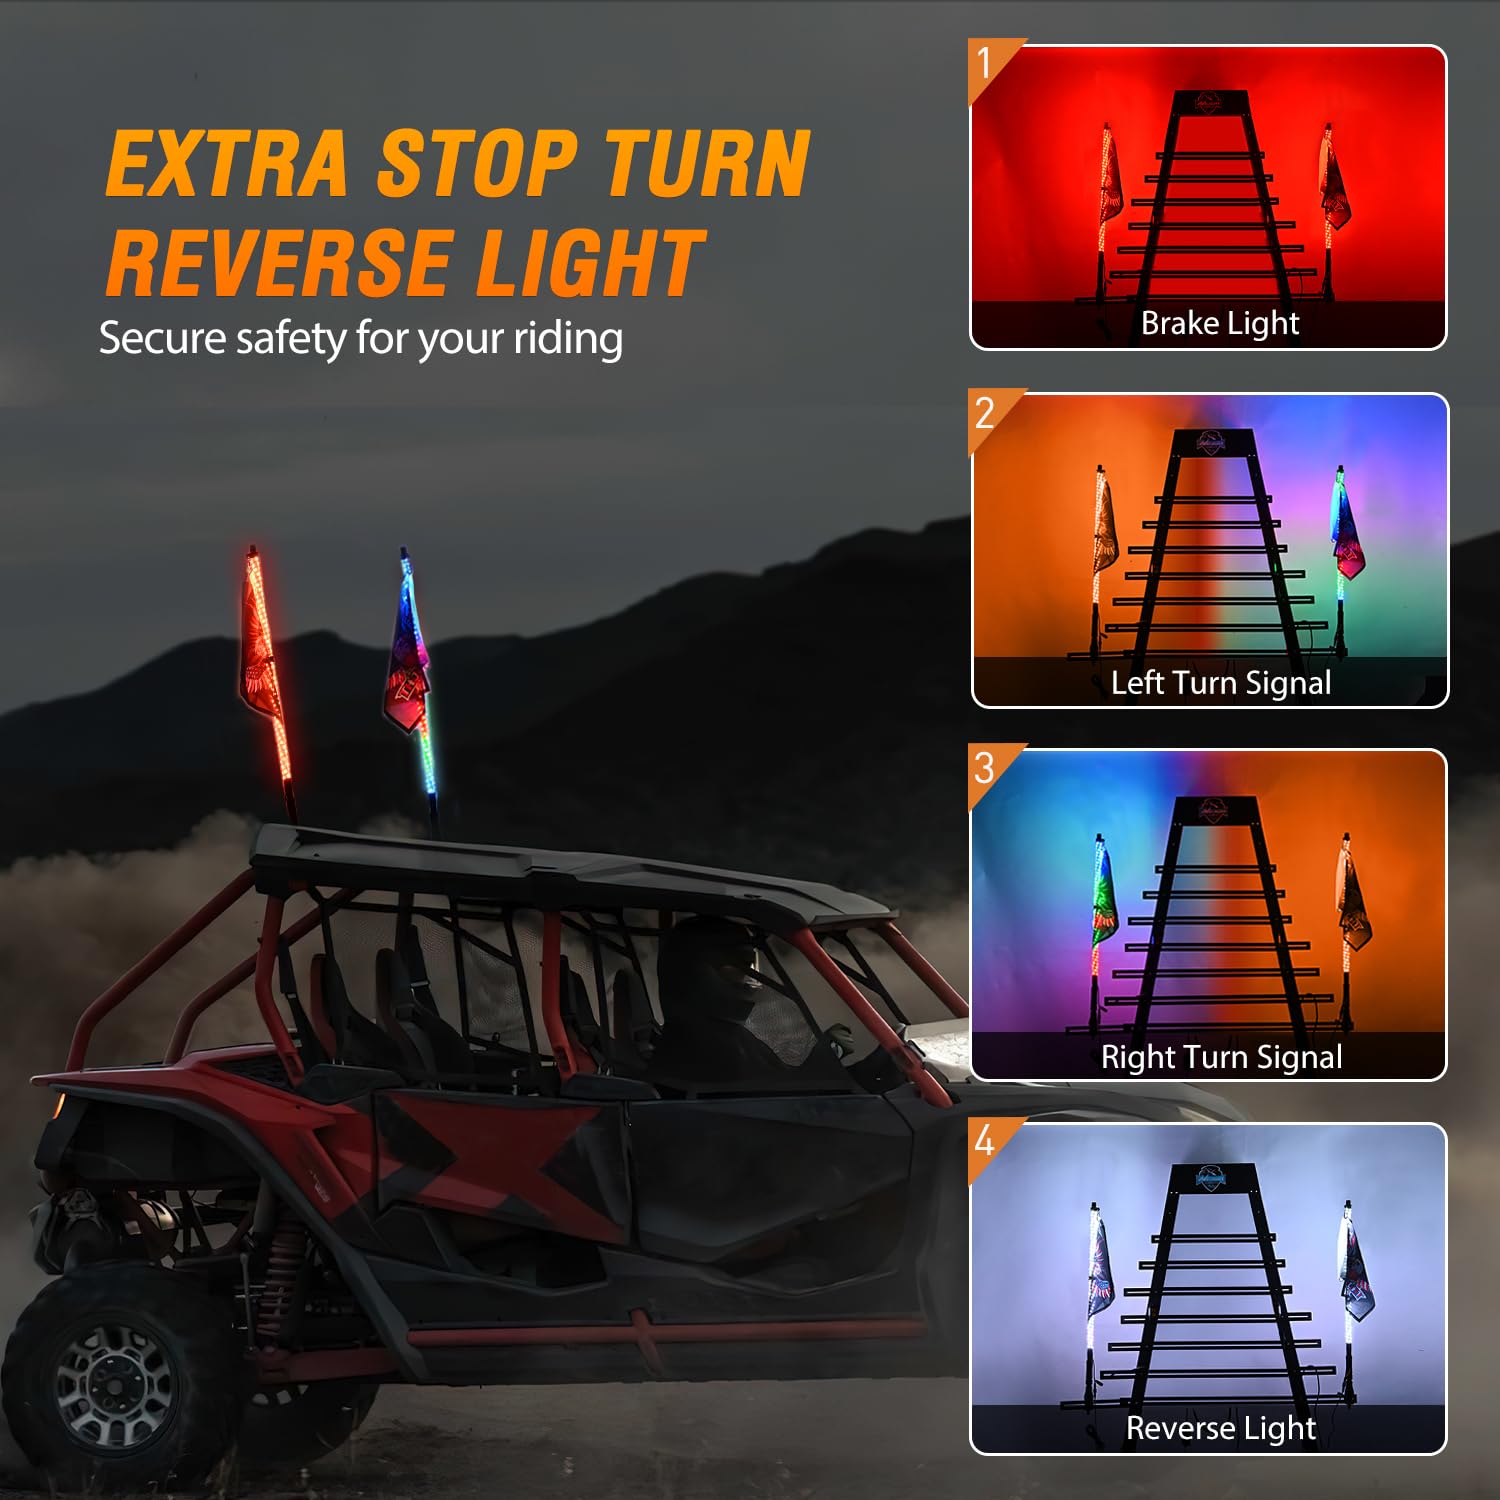 Nilight 2PCS 2FT RGB LED Whip Light with Extra Stop Turn Reverse Light, Remote & App Control, DIY Chasing Patterns, Safety Antenna Lighted Whips for ATV UTV Polaris RZR Can-am, 2 Year Warranty